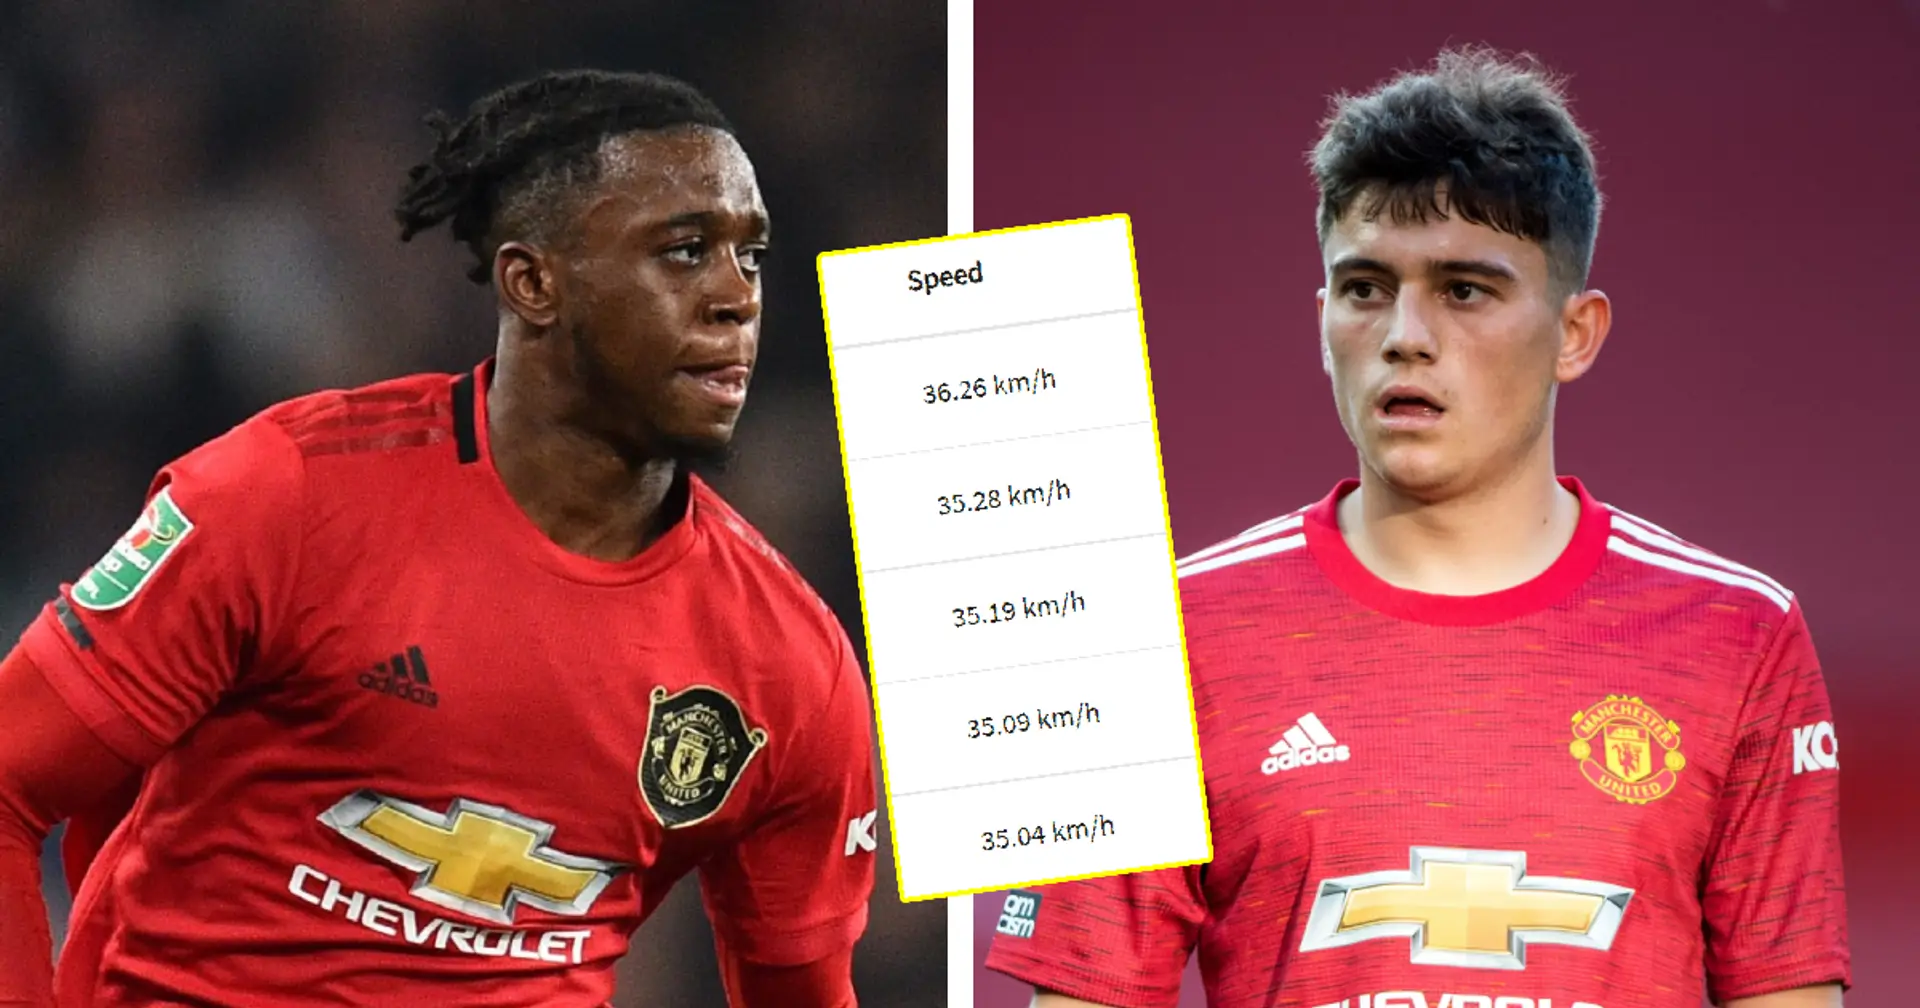 Not Wan-Bissaka or Dan James: Man United's fastest player in 2020/21 revealed 